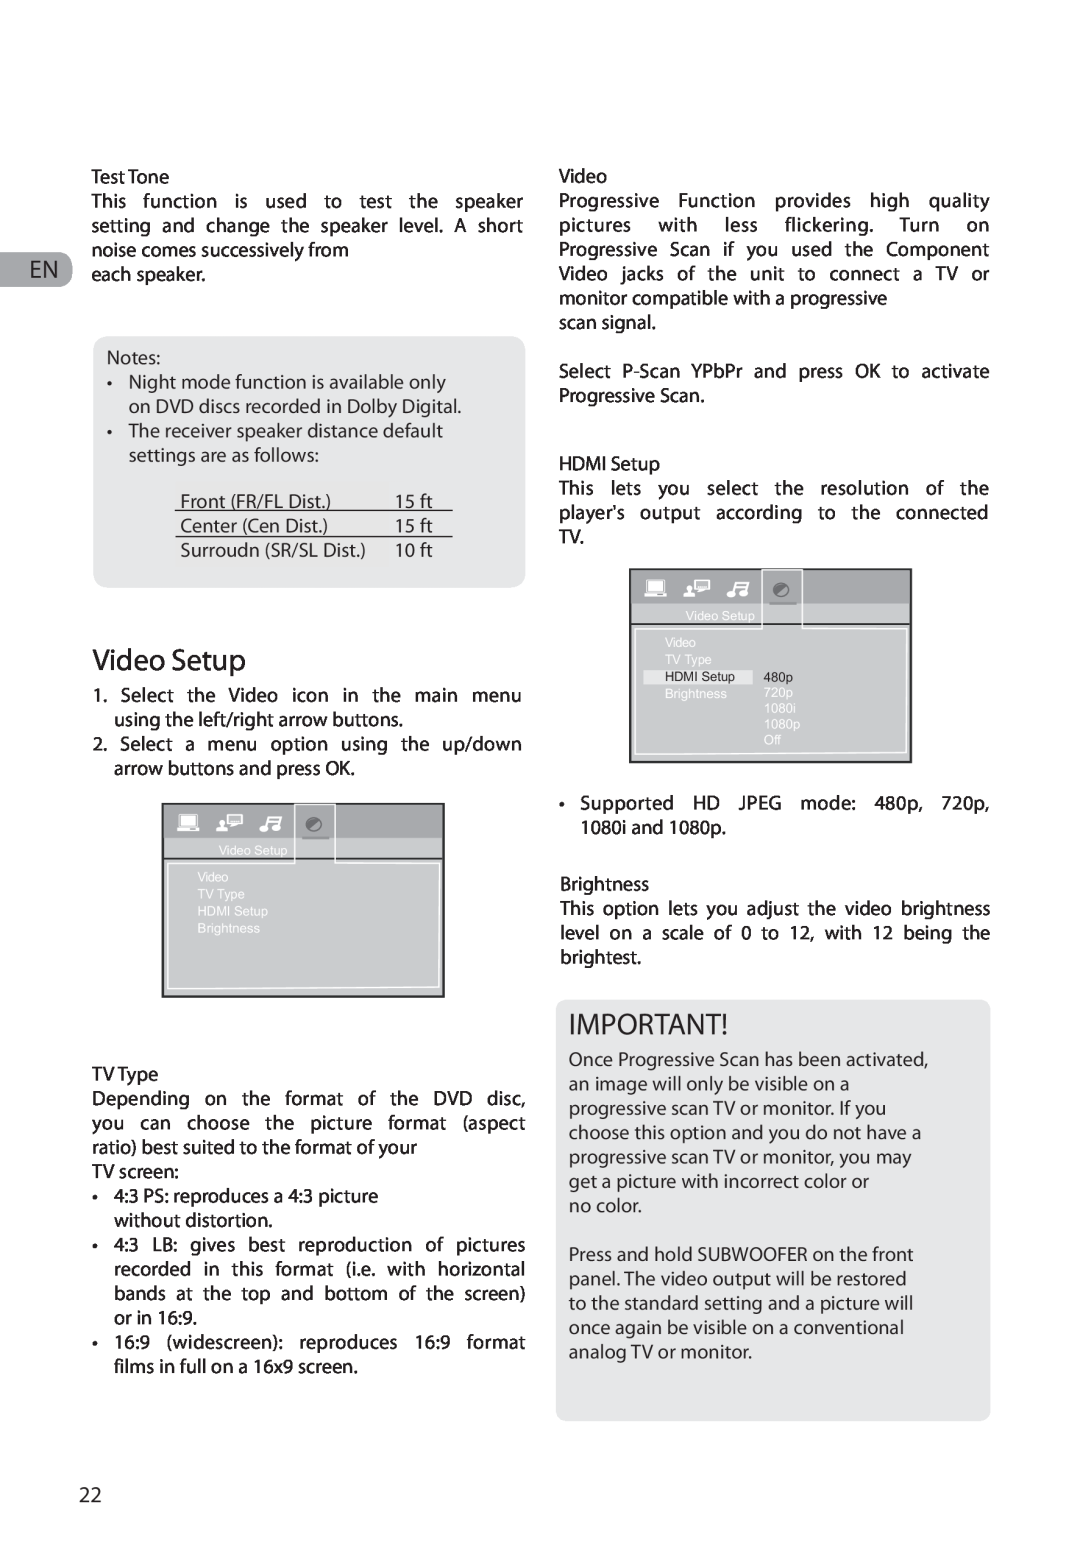 RCA RTD317 user manual Video Setup, Supported HD JPEG mode 480p, 720p, 1080i and 1080p 